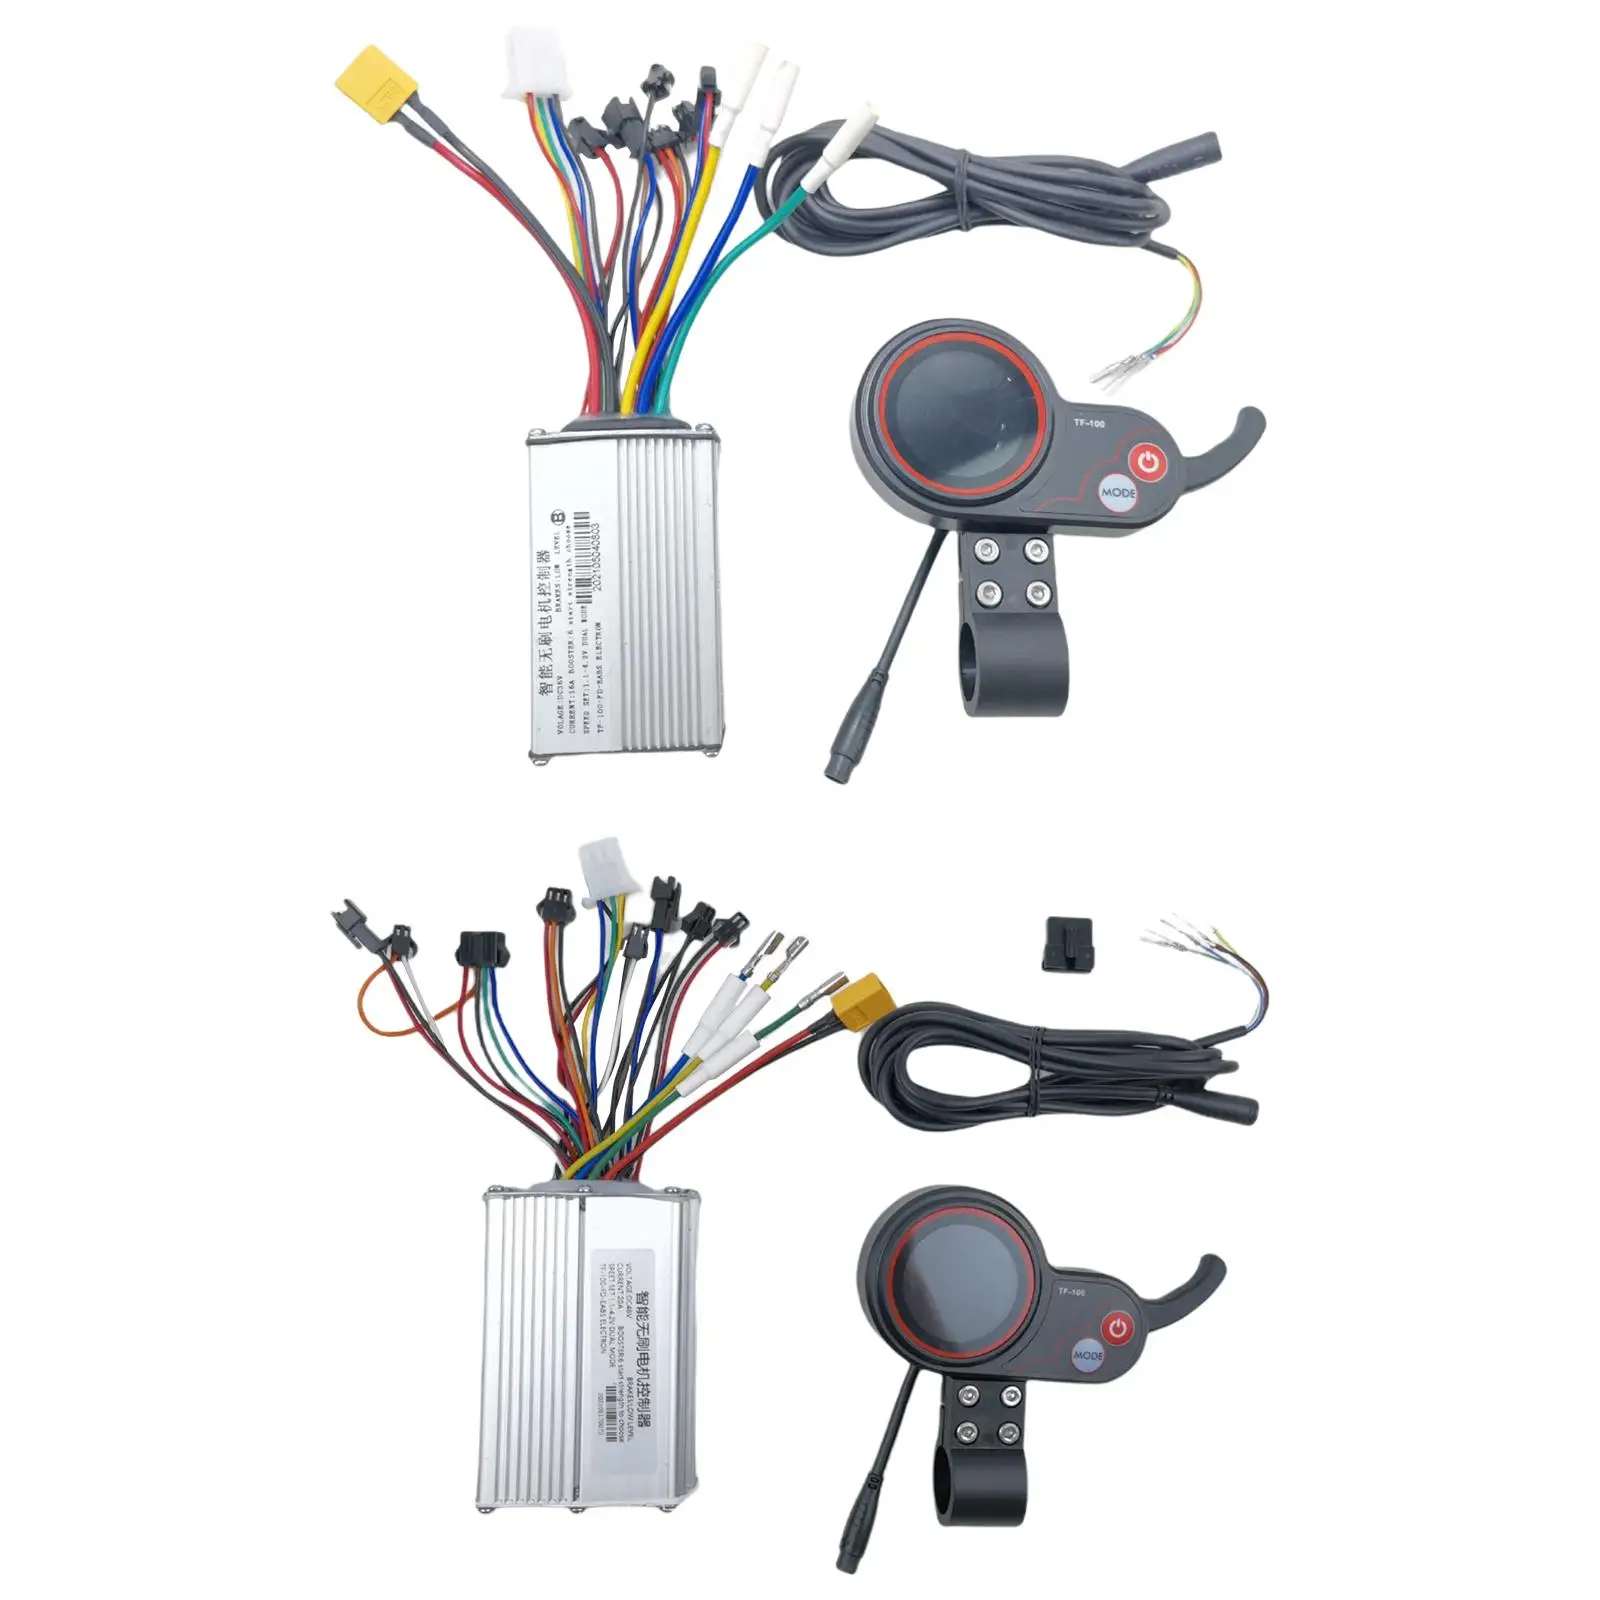 Motor Brushless Controller, Waterproof LCD Display Panel and Ebike Scooter Brushless Motor Speed Controller Kit